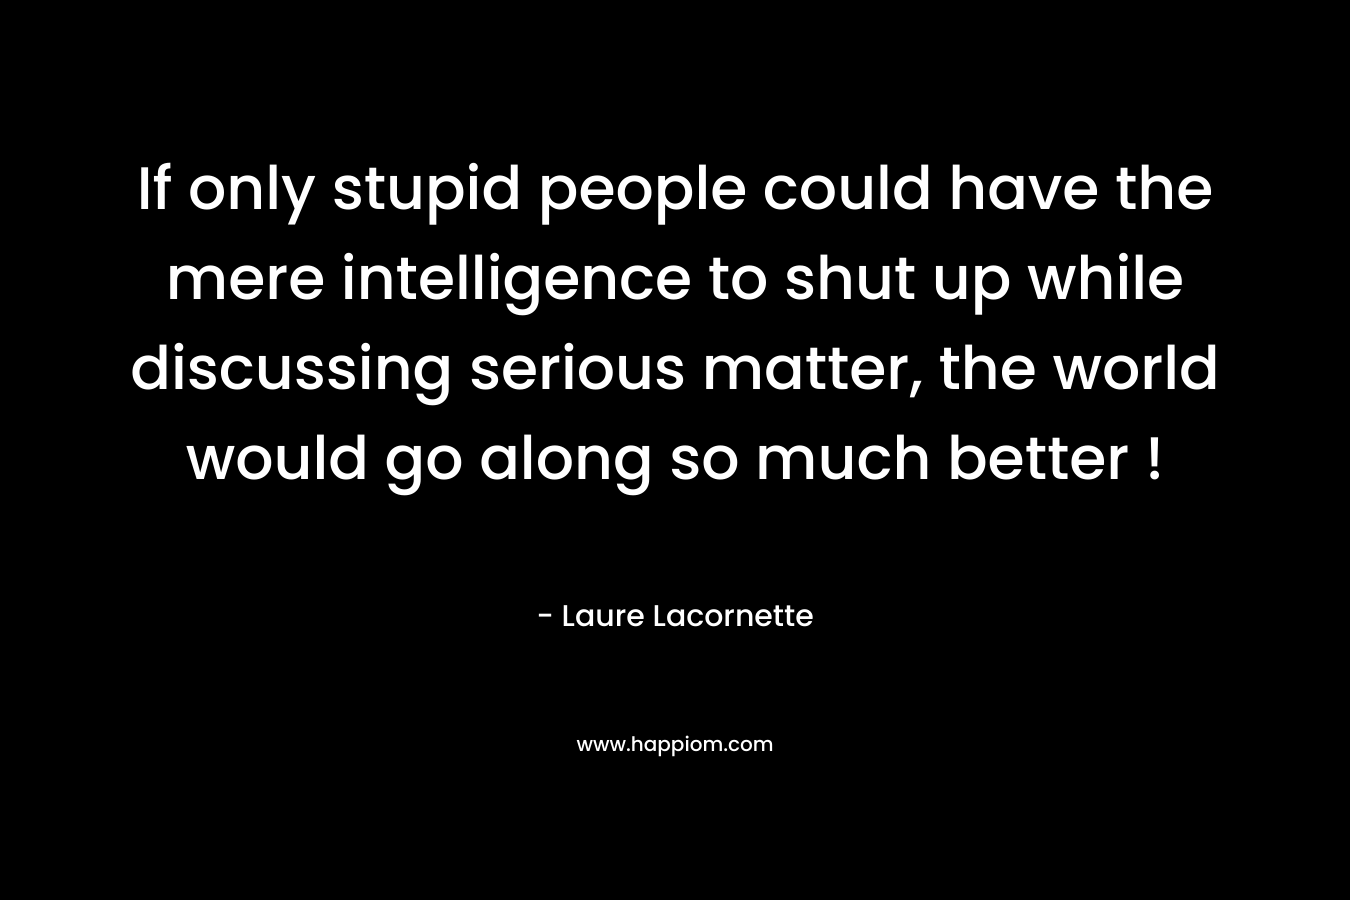 If only stupid people could have the mere intelligence to shut up while discussing serious matter, the world would go along so much better ! – Laure Lacornette